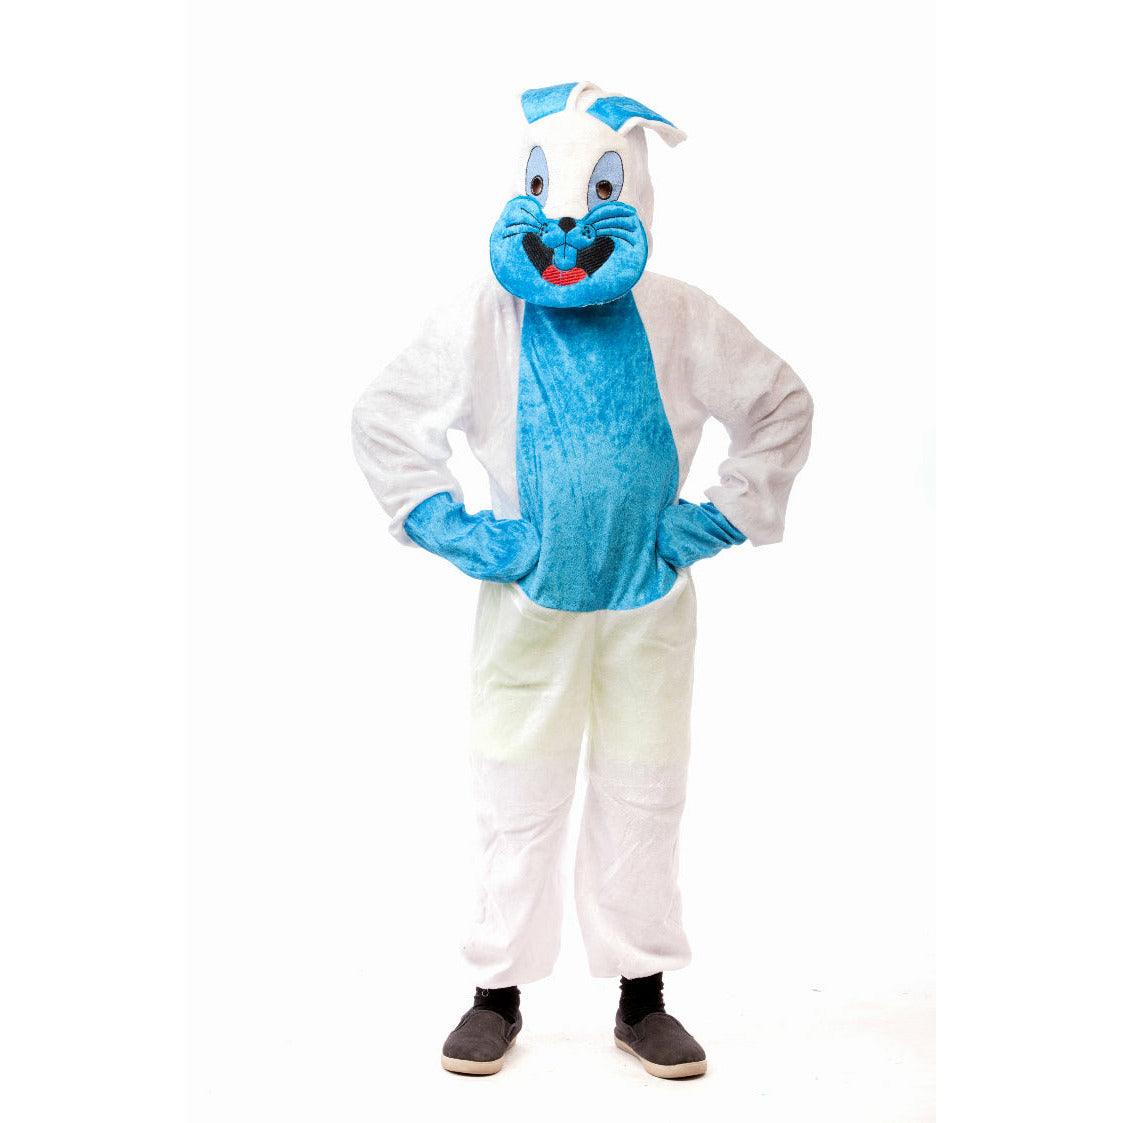 Rabbit Costume - Ourkids - M&A